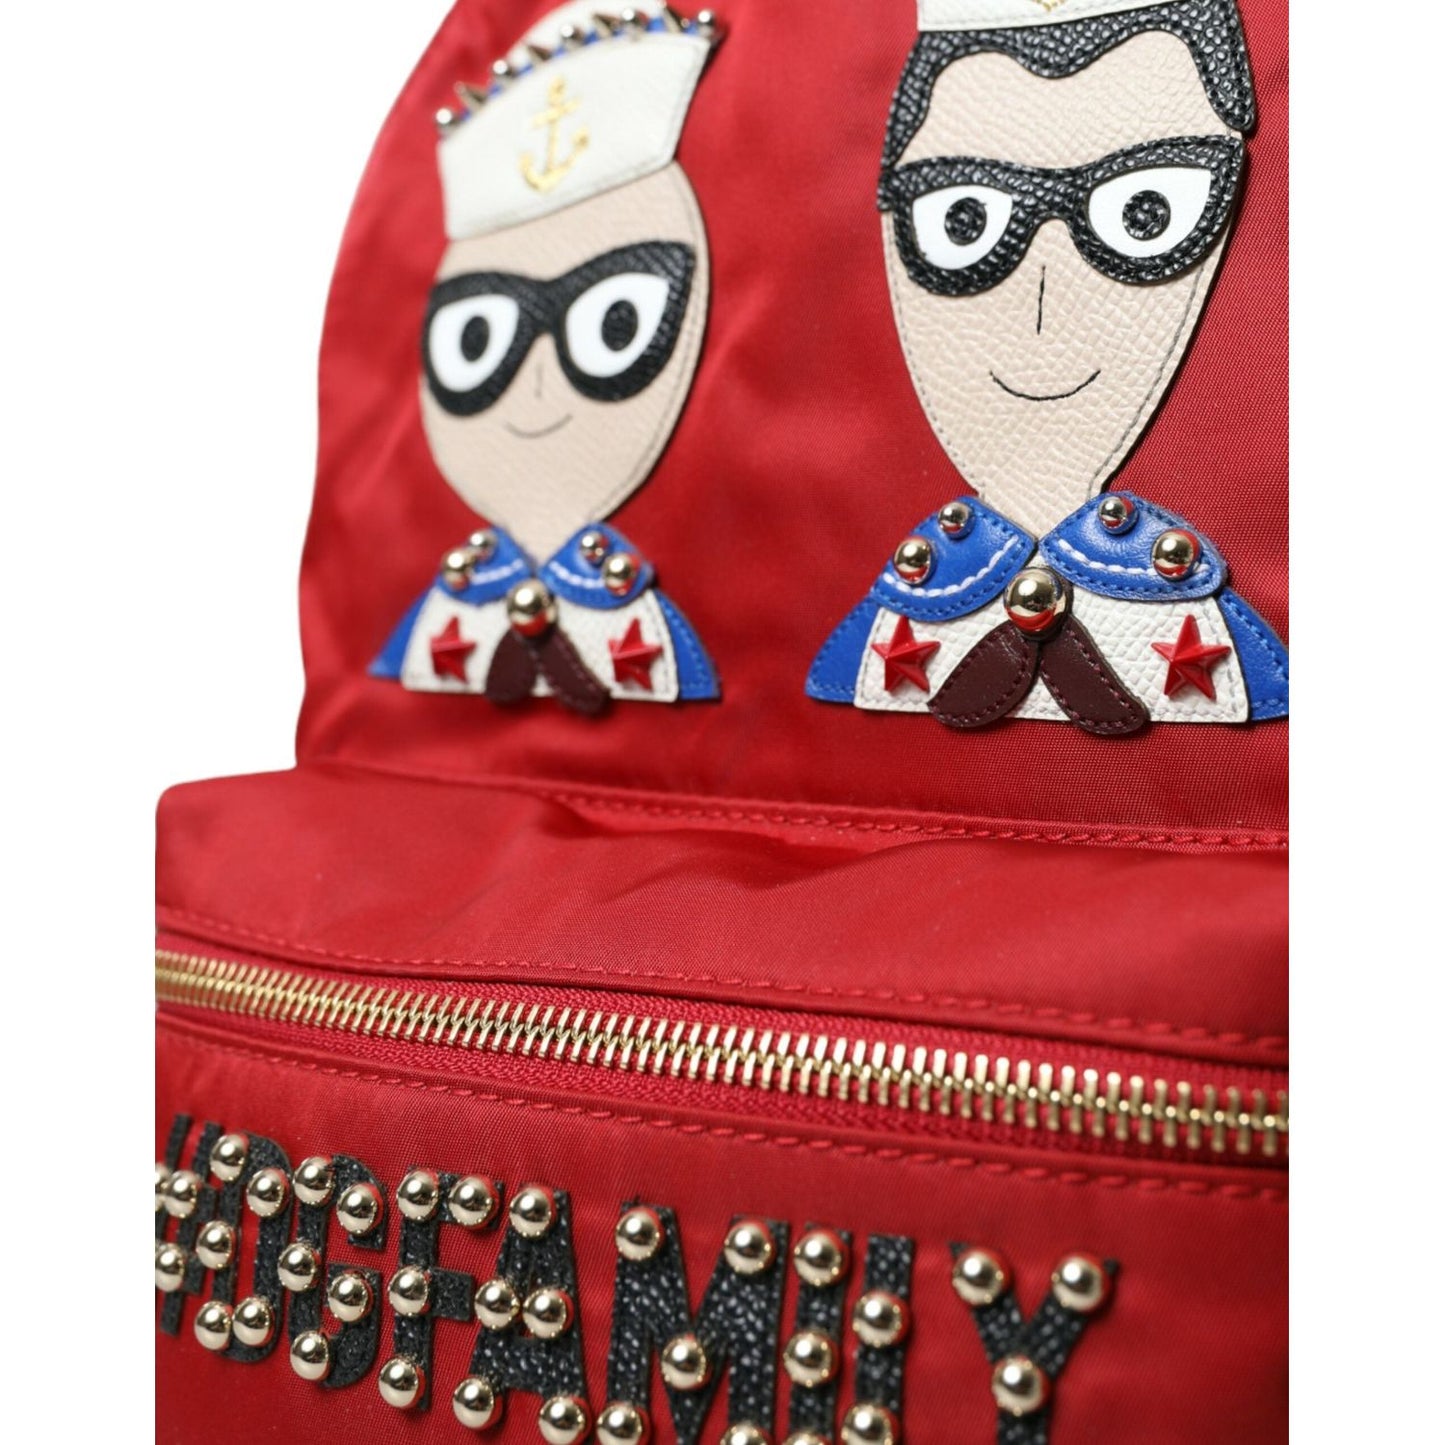 Dolce & Gabbana Embellished Red Backpack with Gold Detailing embellished-red-backpack-with-gold-detailing